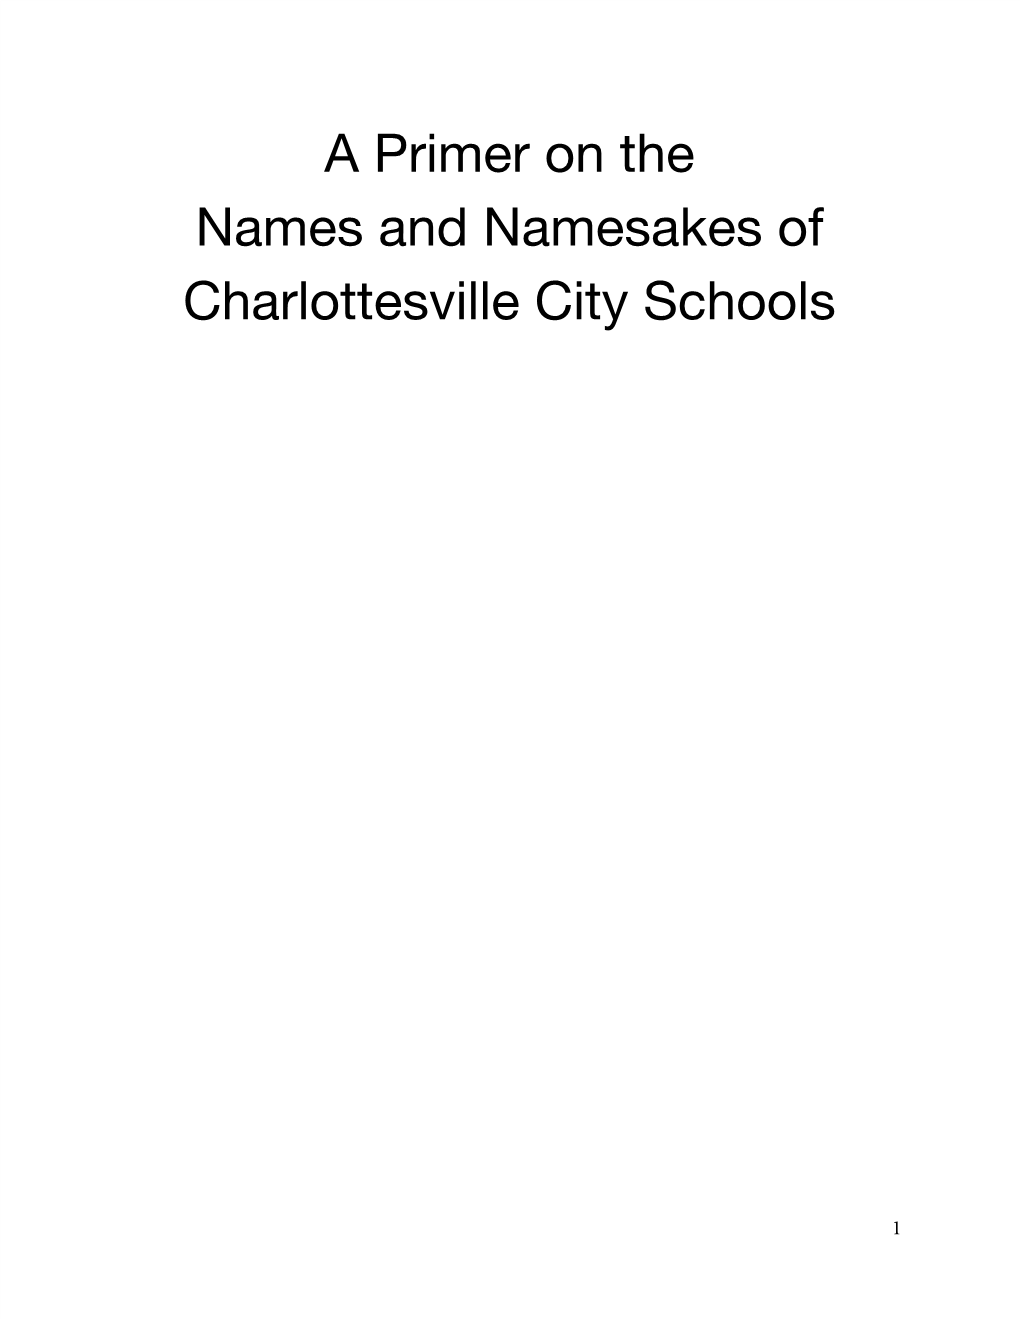 A Primer on the Names and Namesakes of Charlottesville City